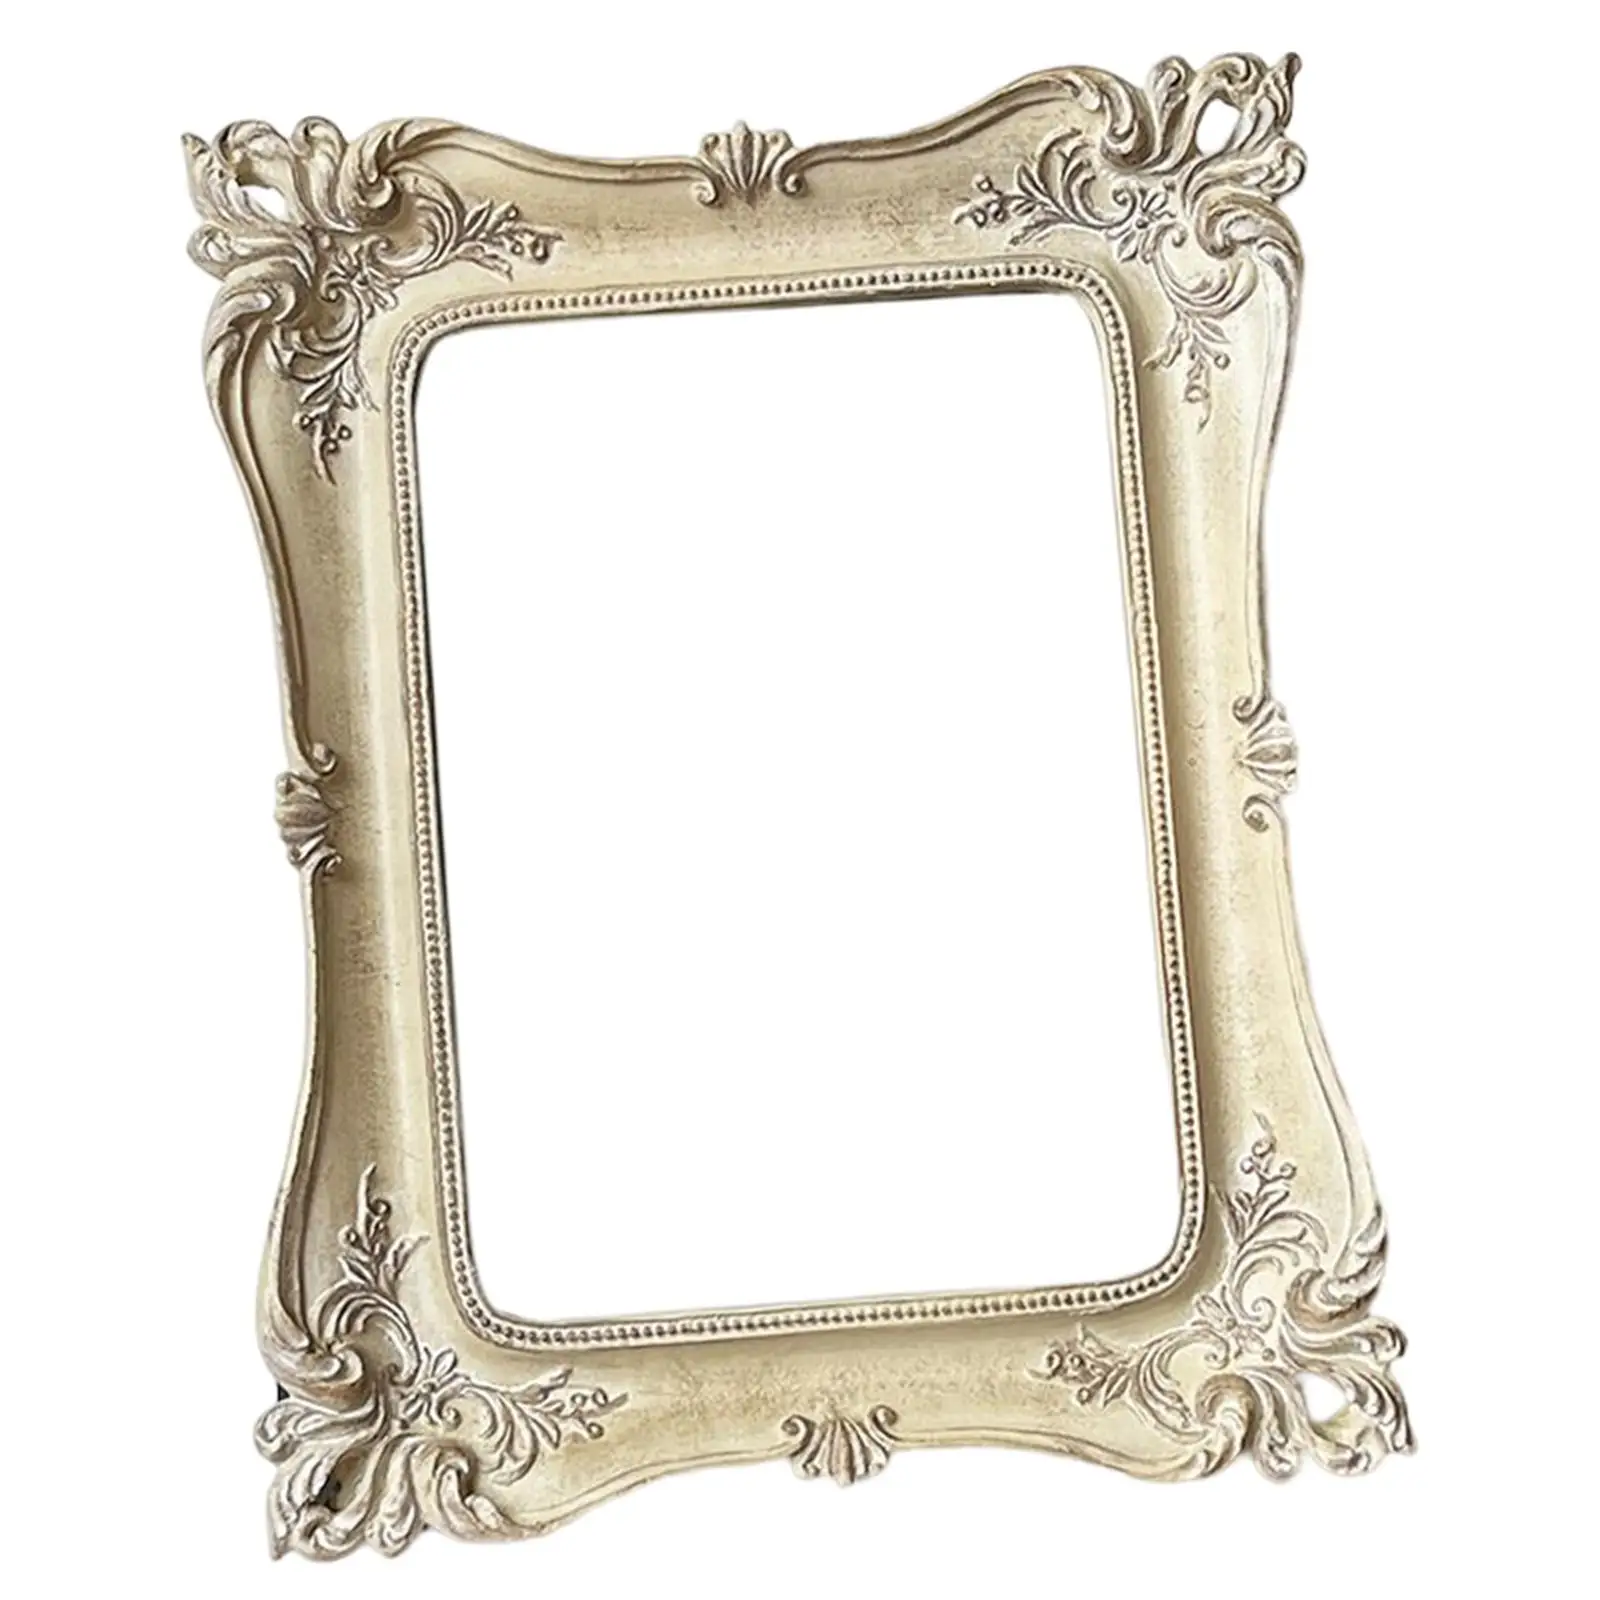 Luxury Antique Picture Frame Tabletop and Wall Hanging Wedding Gift Freestanding Deluxe Floral Design Vintage Photo Frames